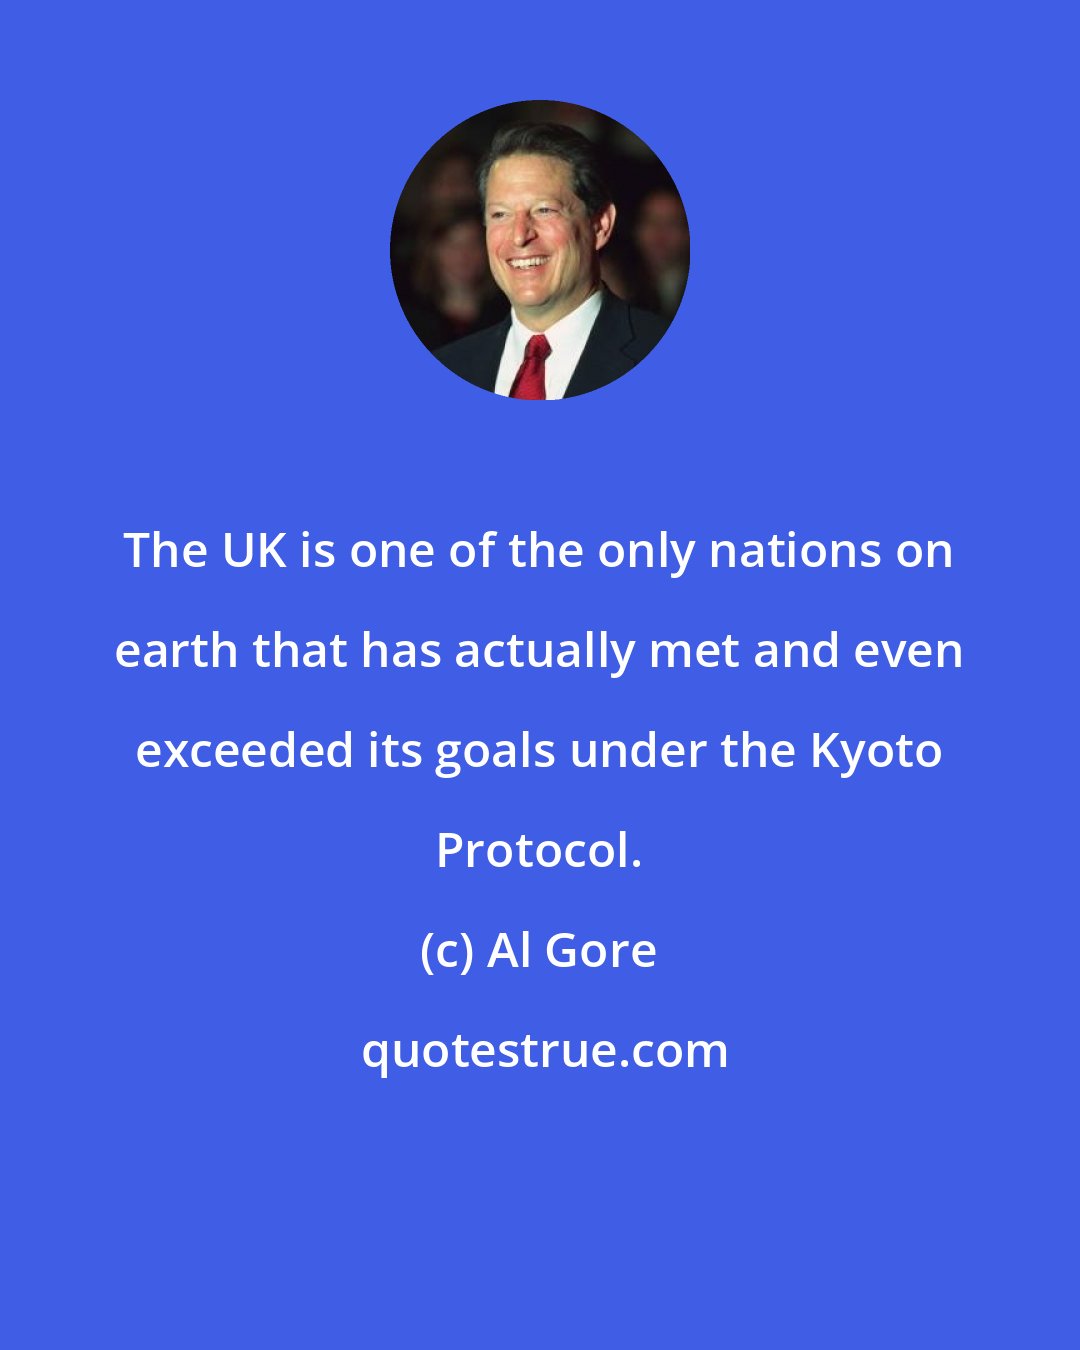 Al Gore: The UK is one of the only nations on earth that has actually met and even exceeded its goals under the Kyoto Protocol.